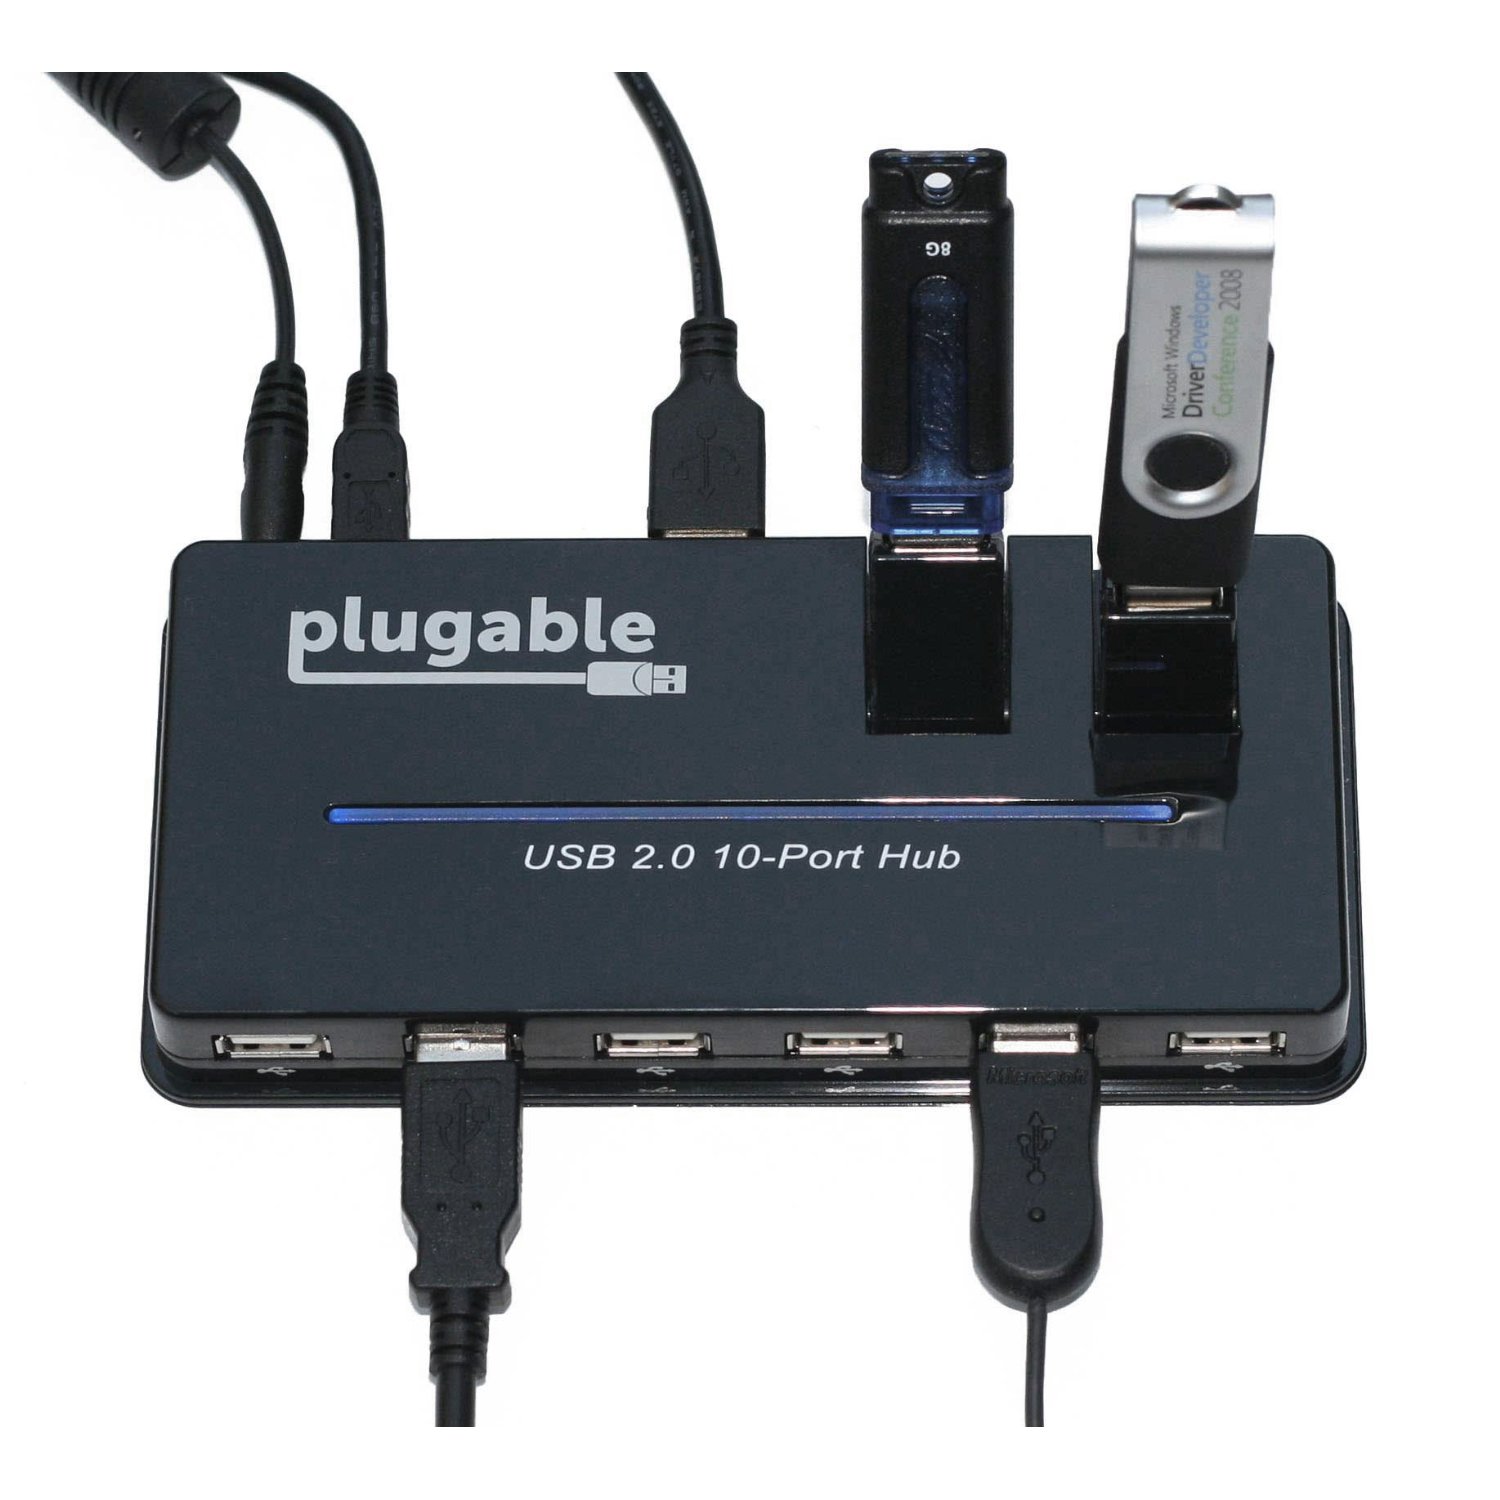 http://thetechjournal.com/wp-content/uploads/images/1201/1325695390-plugable-usb-20-10-port-hub-with-power-adapter-5.jpg